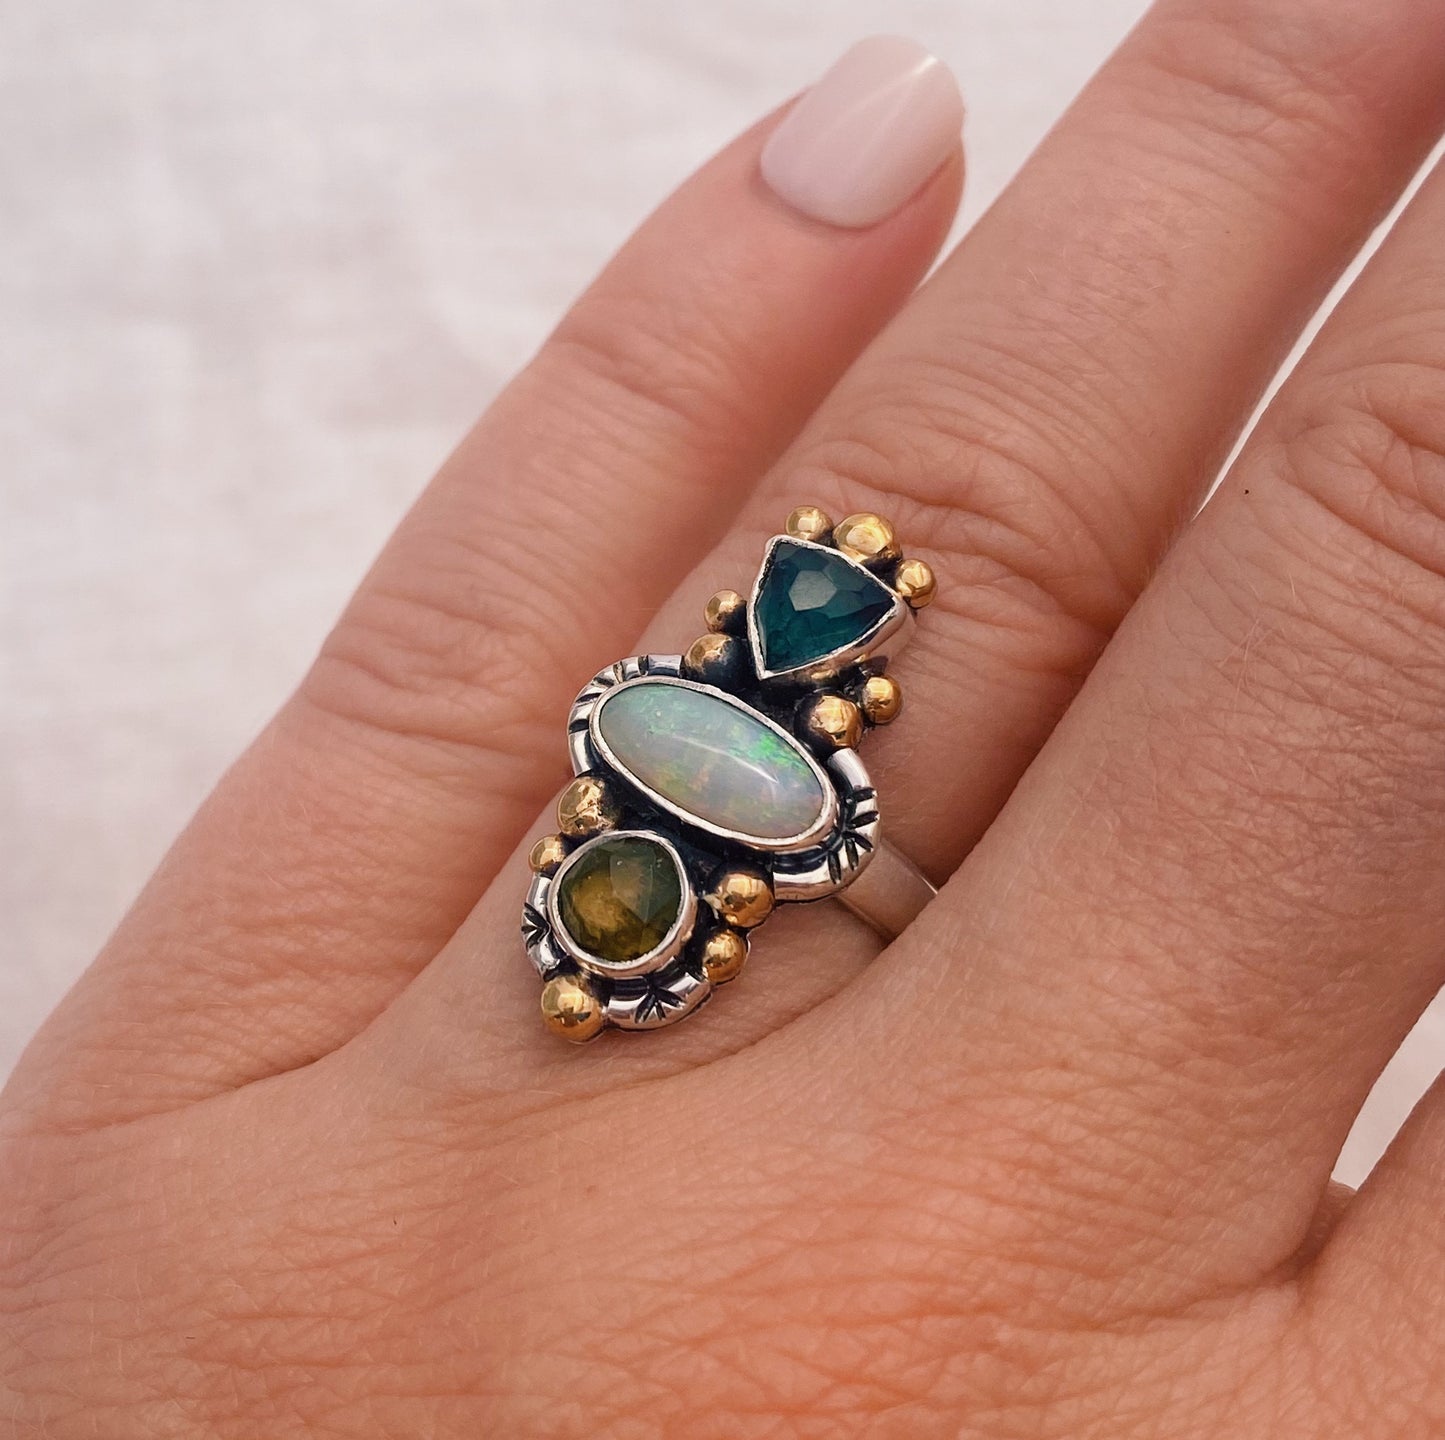 Trine Ring (C) ◇ Faceted Tourmaline + Australian Opal + Faceted Tourmaline ◇ Size 7